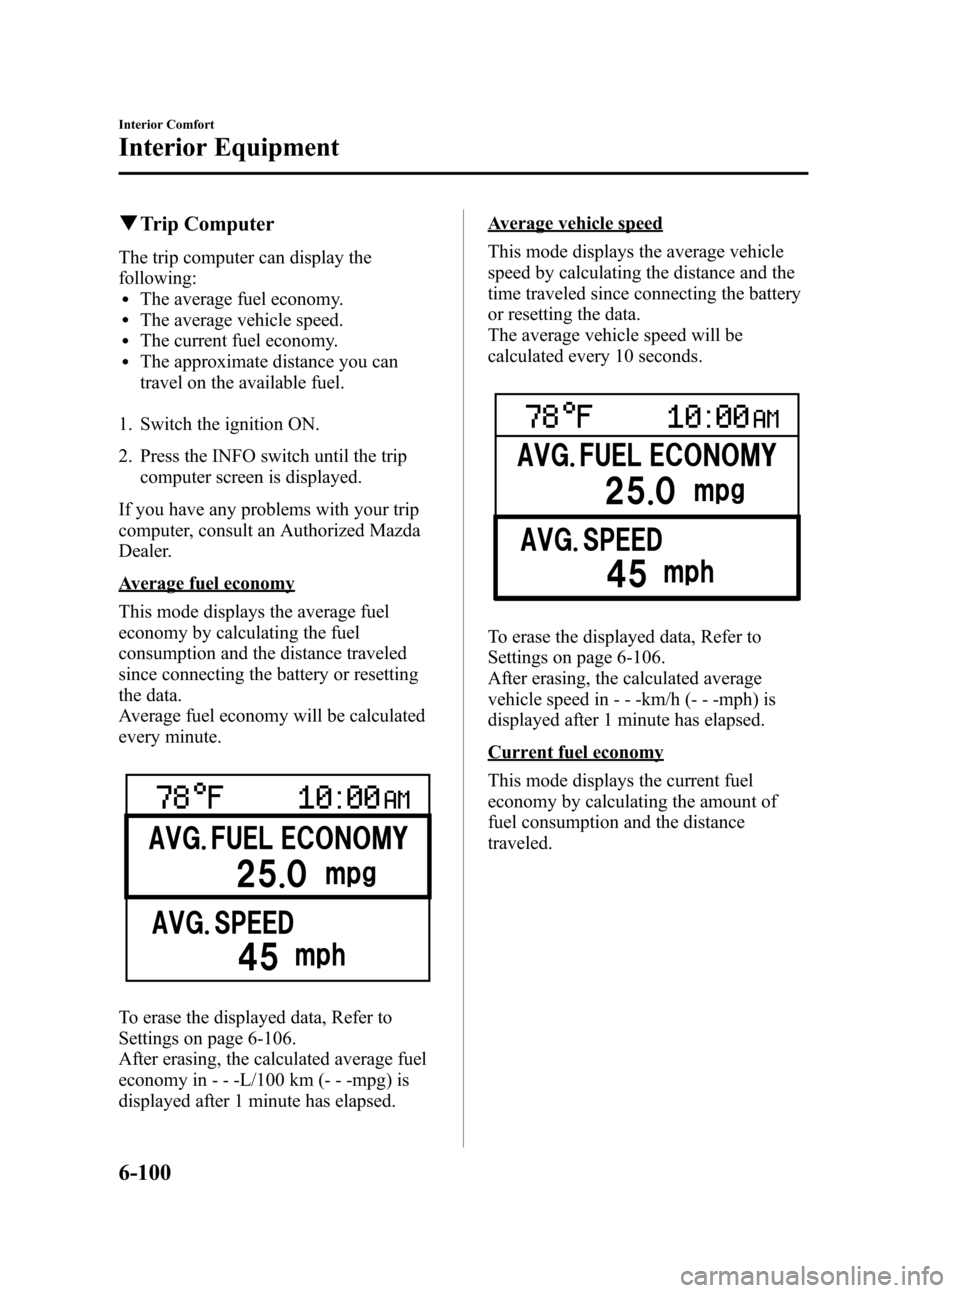 MAZDA MODEL 3 HATCHBACK 2010  Owners Manual (in English) Black plate (324,1)
qTrip Computer
The trip computer can display the
following:
lThe average fuel economy.lThe average vehicle speed.lThe current fuel economy.lThe approximate distance you can
travel 